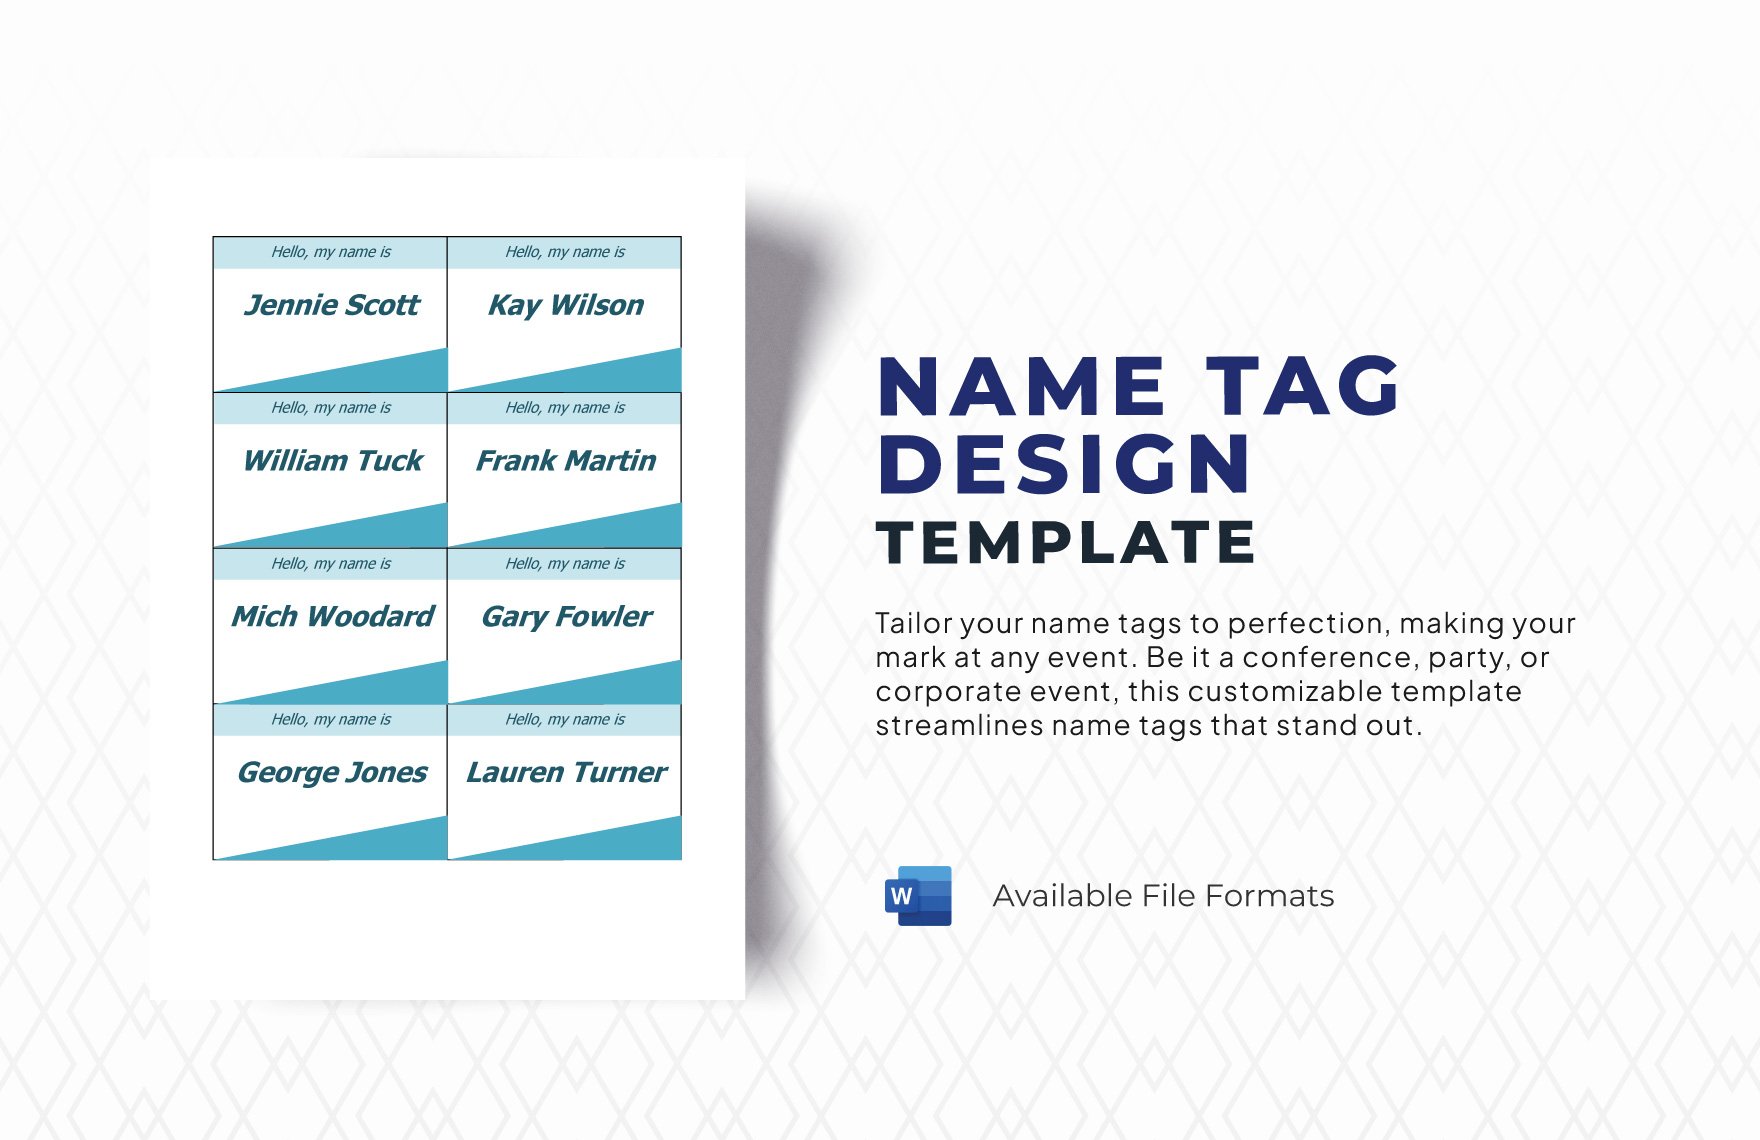 Name Tag Design Template in Word, PDF